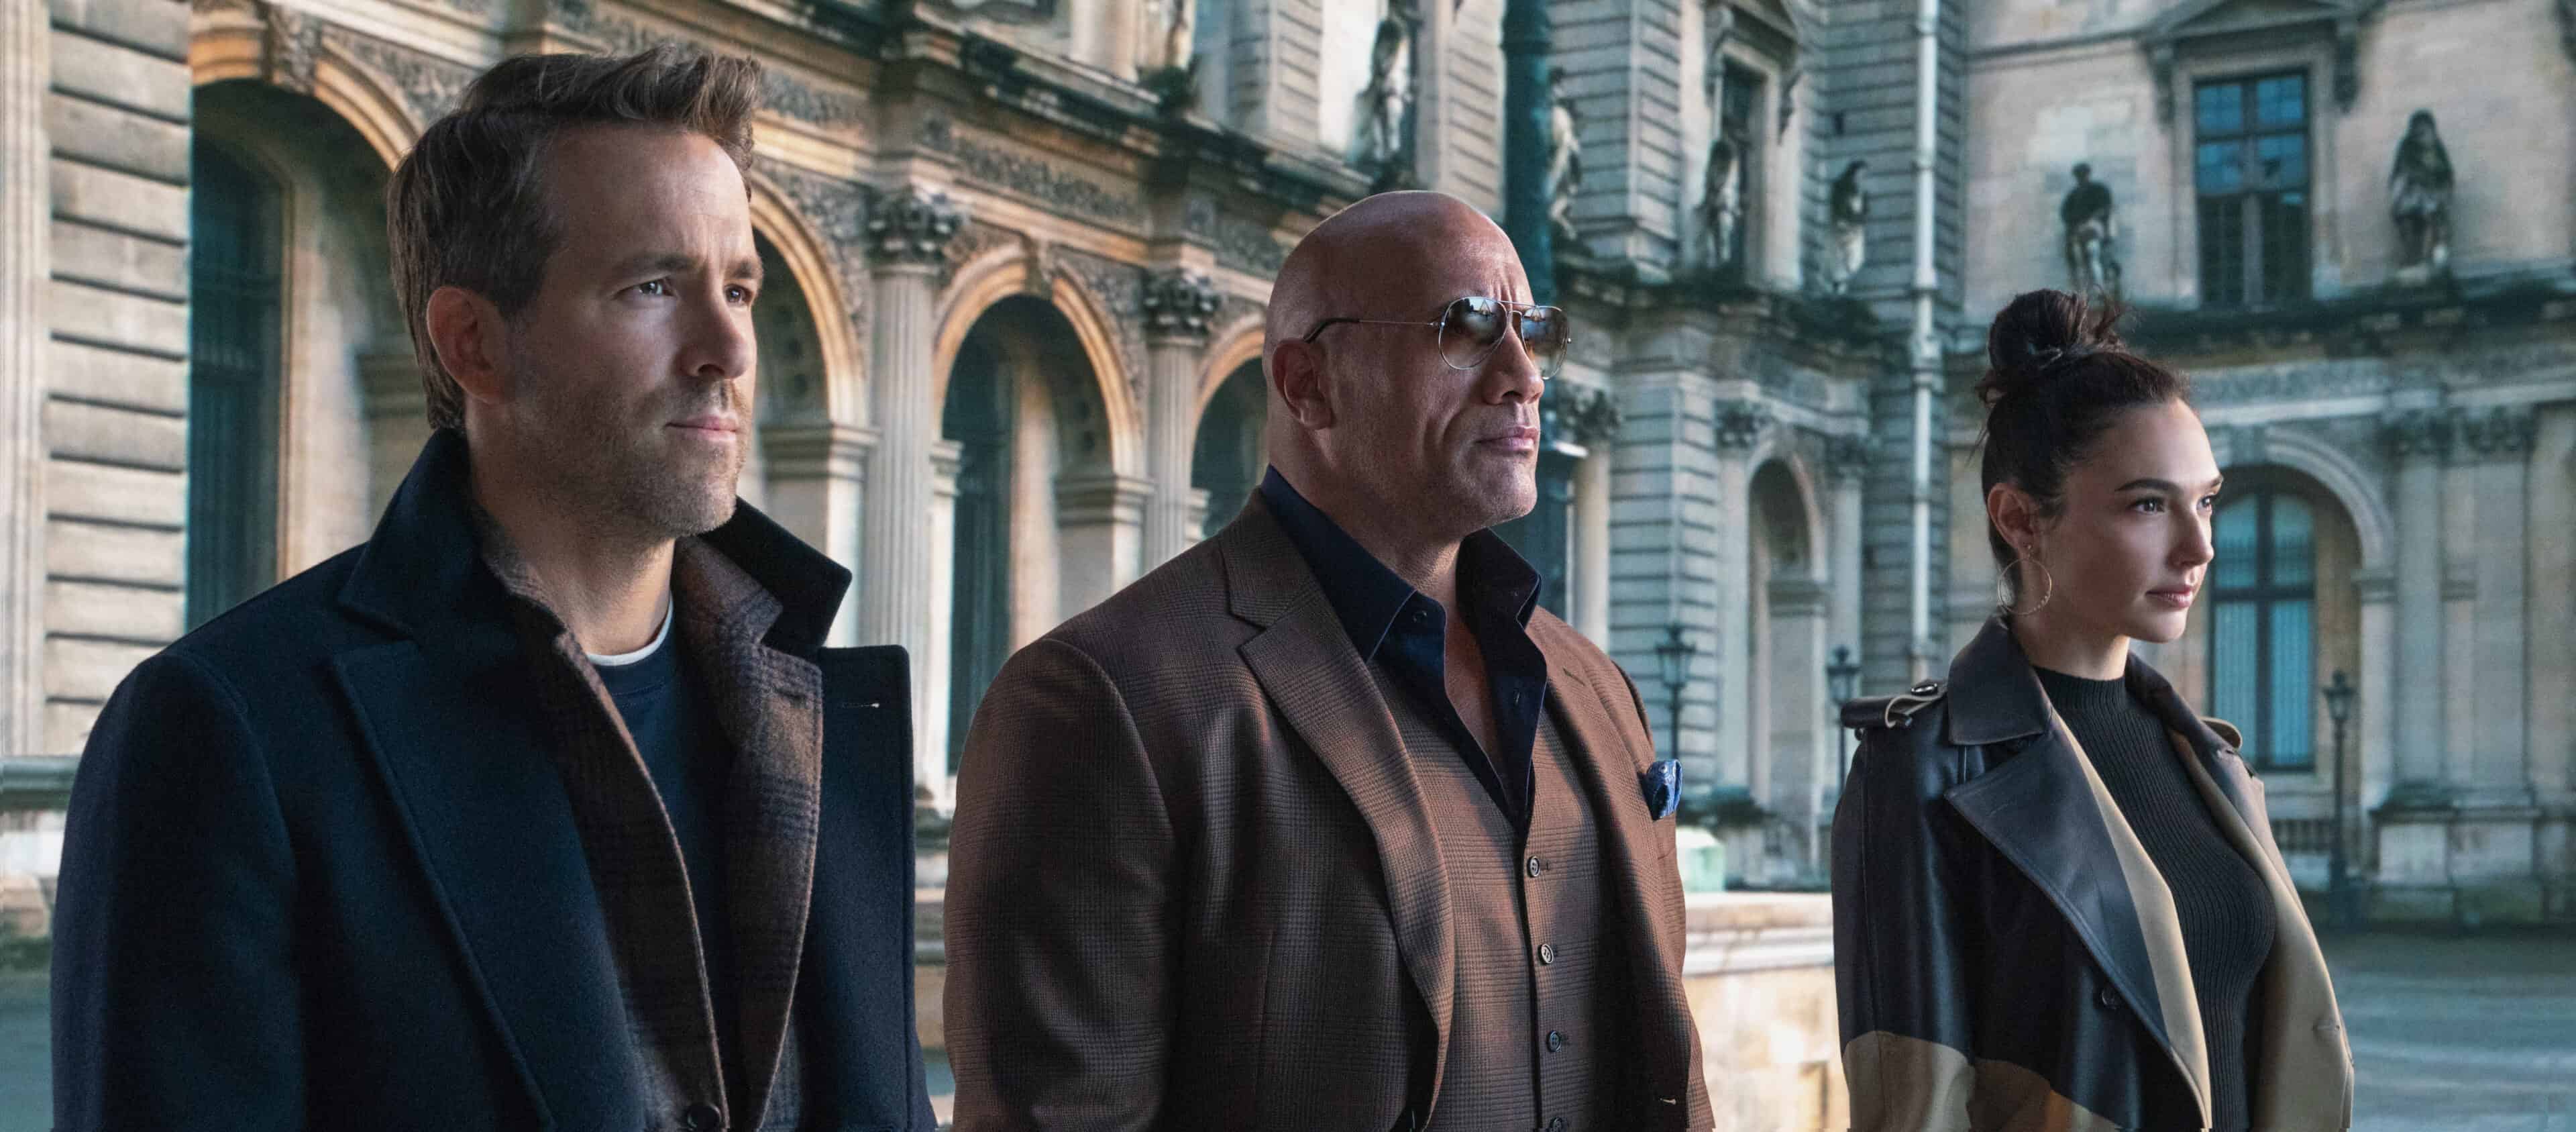 Nolan Booth (Ryan Reynolds), Agent John Hartly (Dwayne Johnson), and The Bishop (Gal Gadot) when they team up